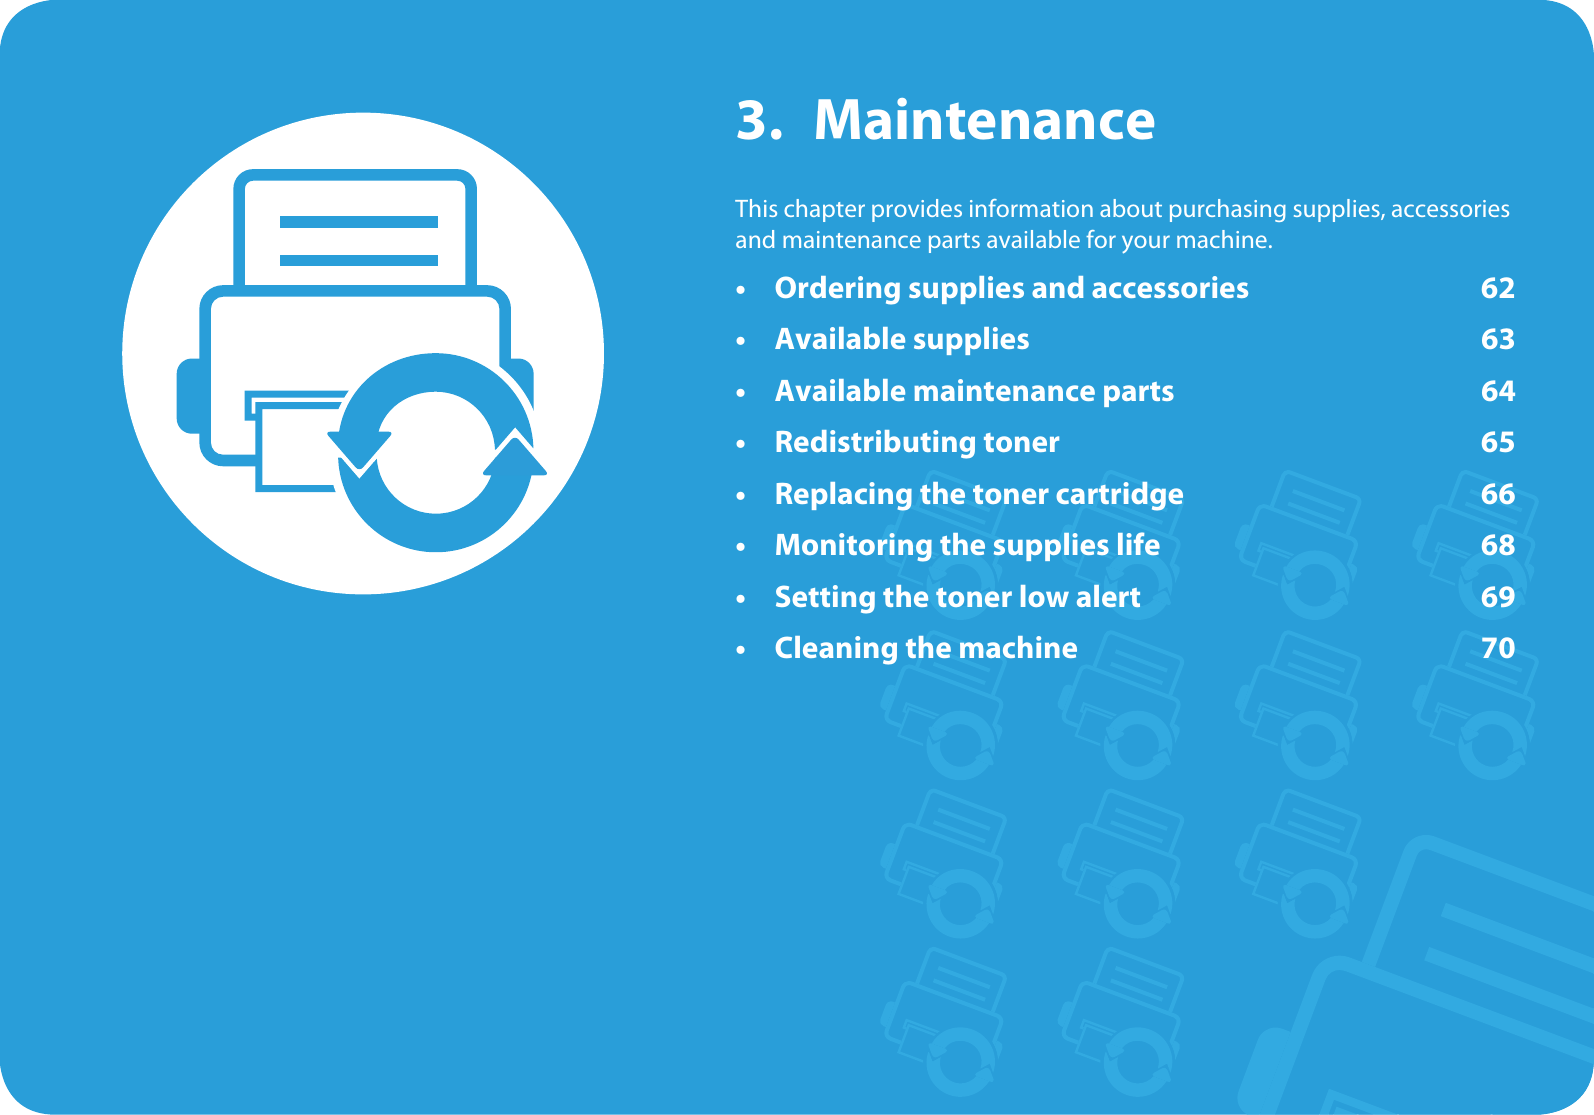 3. MaintenanceThis chapter provides information about purchasing supplies, accessories and maintenance parts available for your machine.• Ordering supplies and accessories 62• Available supplies 63• Available maintenance parts 64• Redistributing toner 65• Replacing the toner cartridge 66• Monitoring the supplies life 68• Setting the toner low alert 69• Cleaning the machine 70